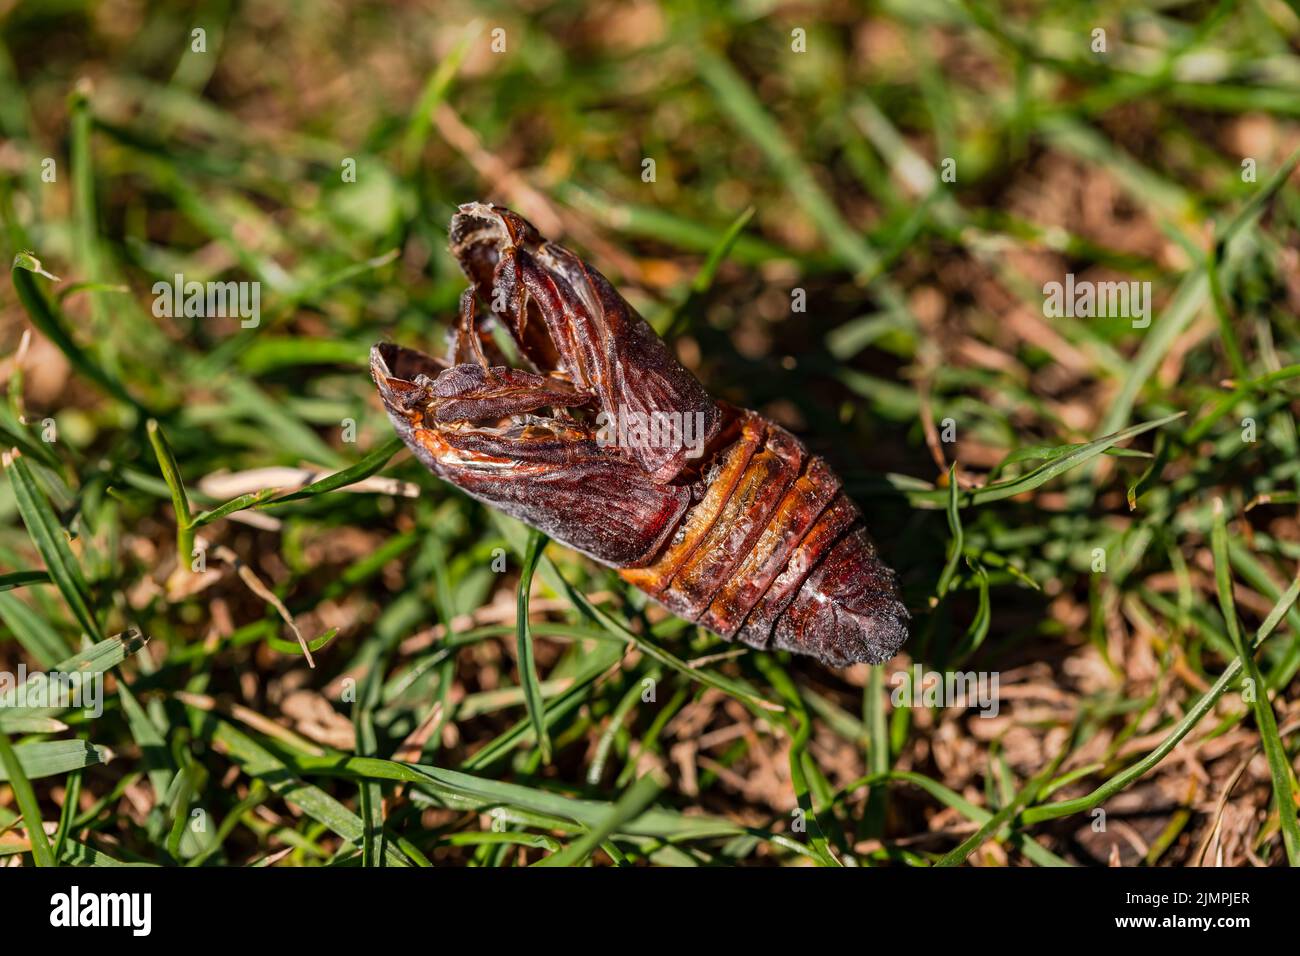 Dried up chitin shell of an insect isolated in the garden Stock Photo